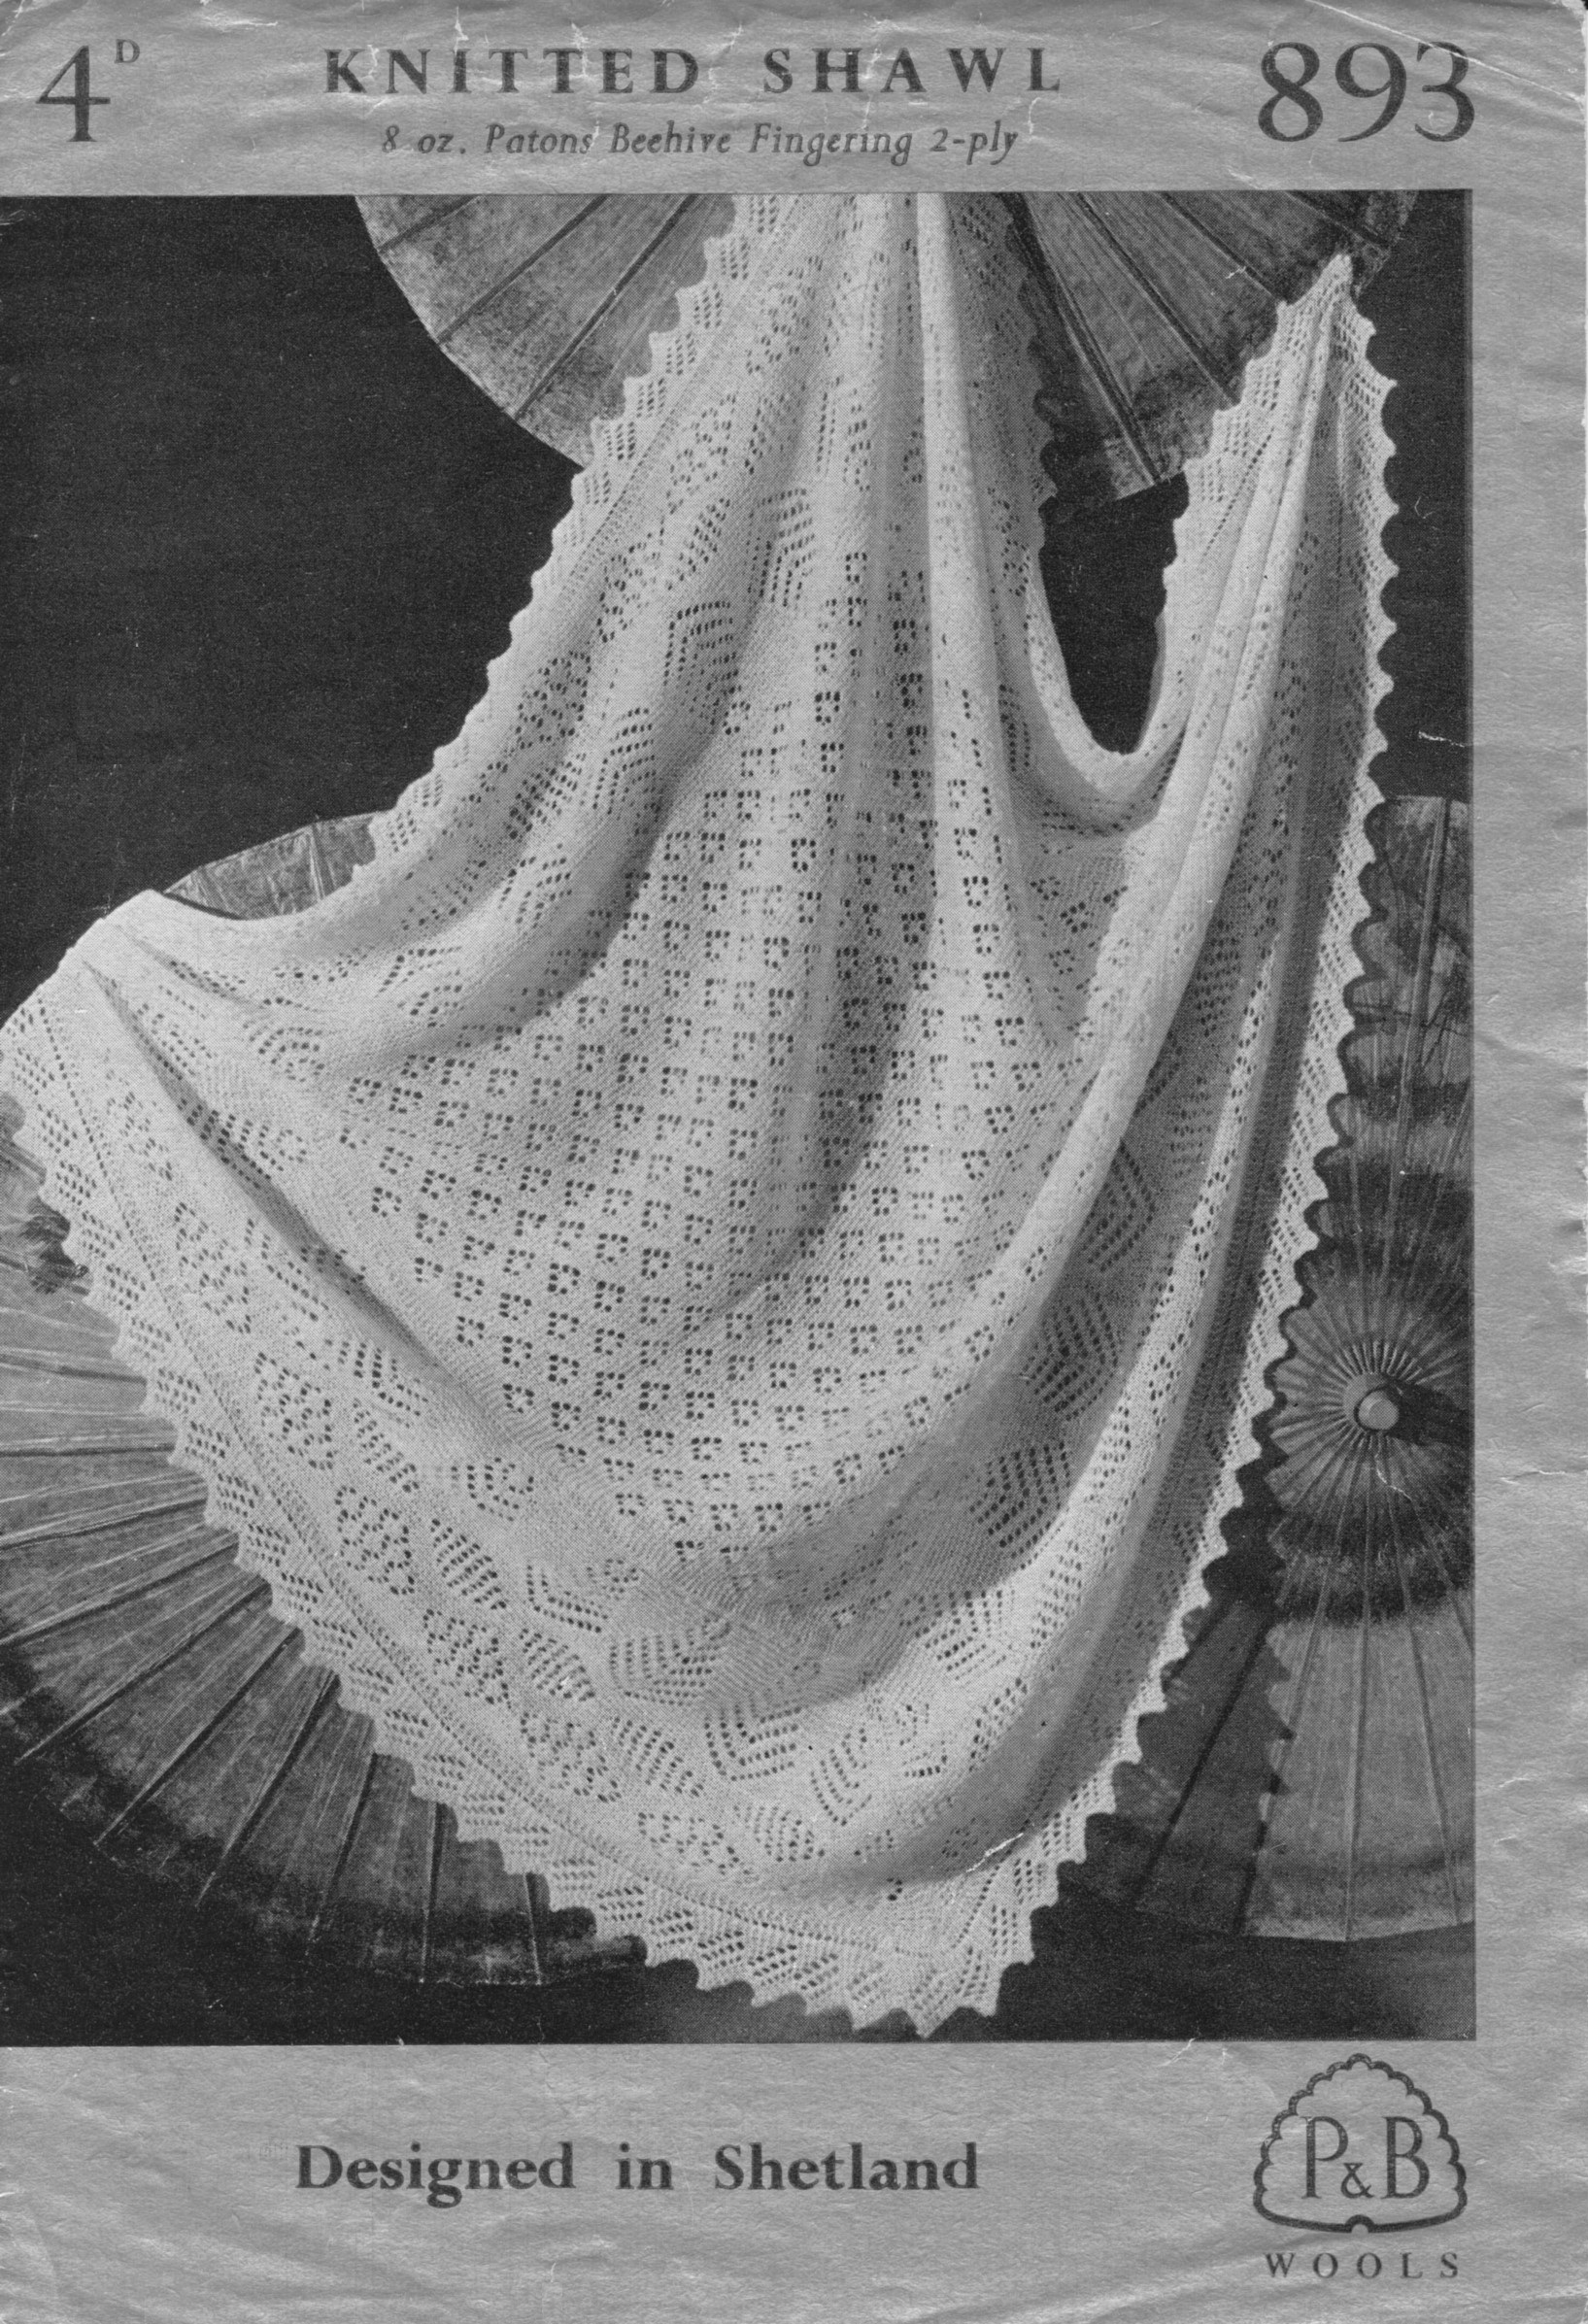 Square knitted lace shawl with saw tooth border. Displayed draped across parasols.